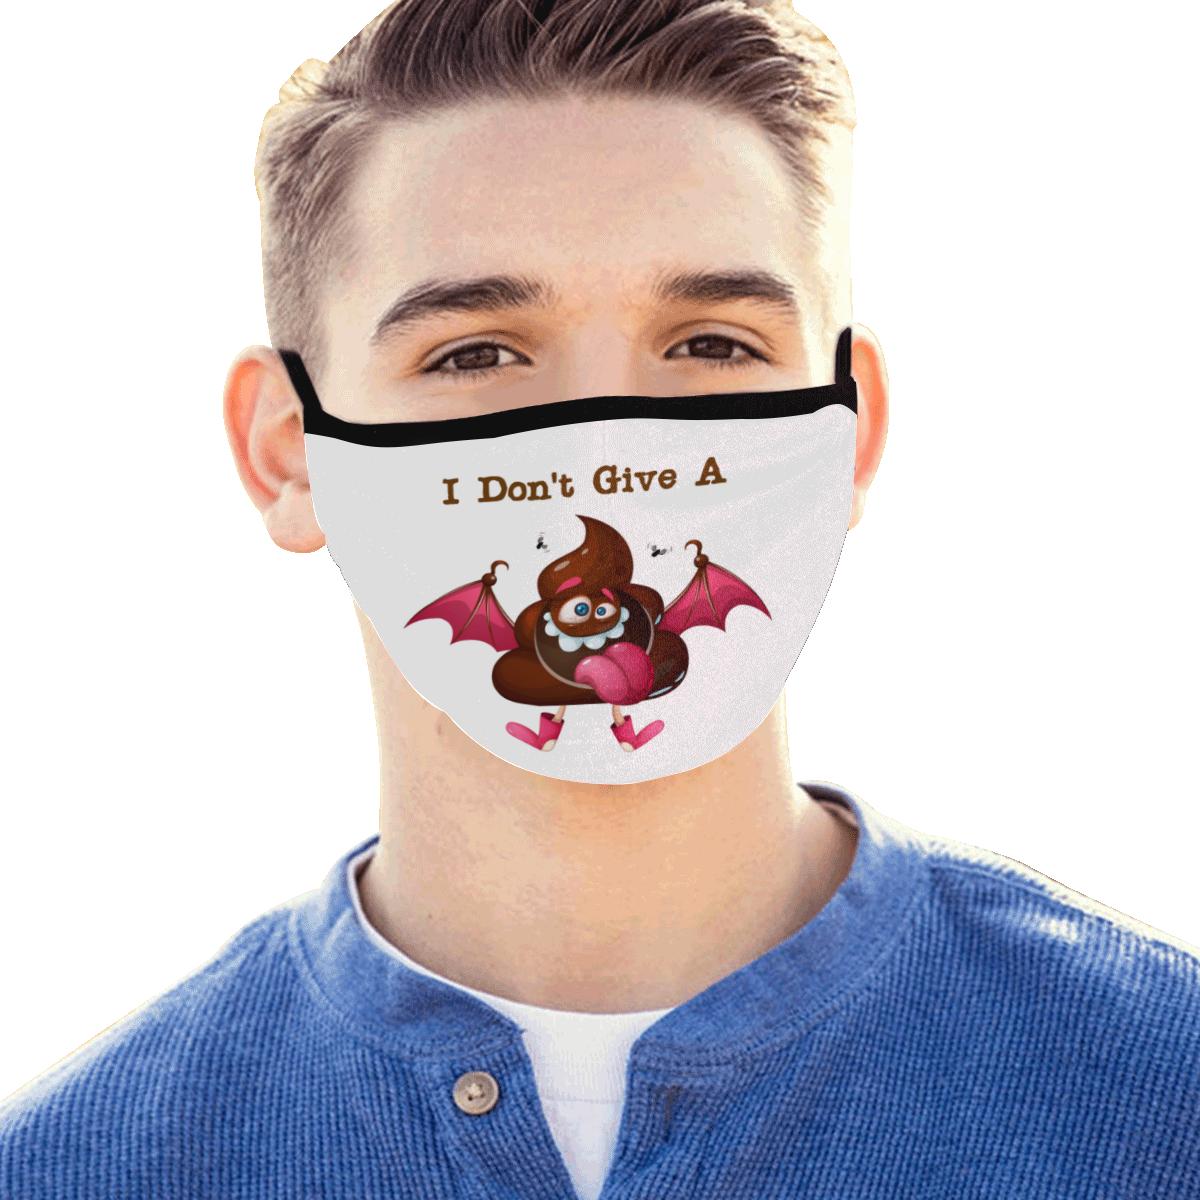 I Don't Give A Flying Poop Mouth Mask